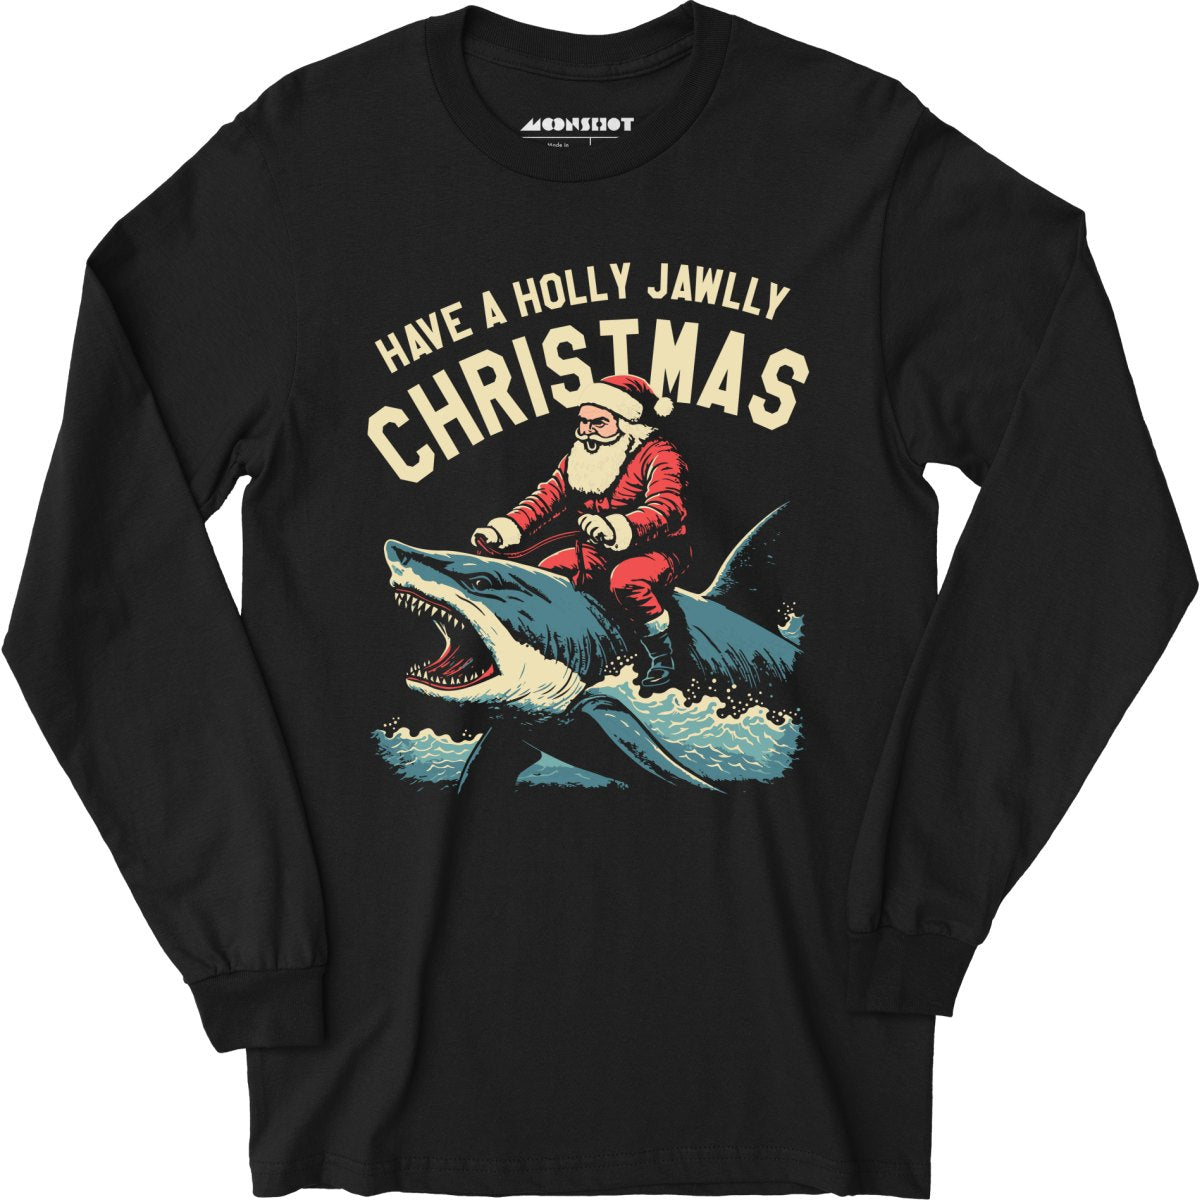 Have a Holly Jawlly Christmas - Long Sleeve T-Shirt